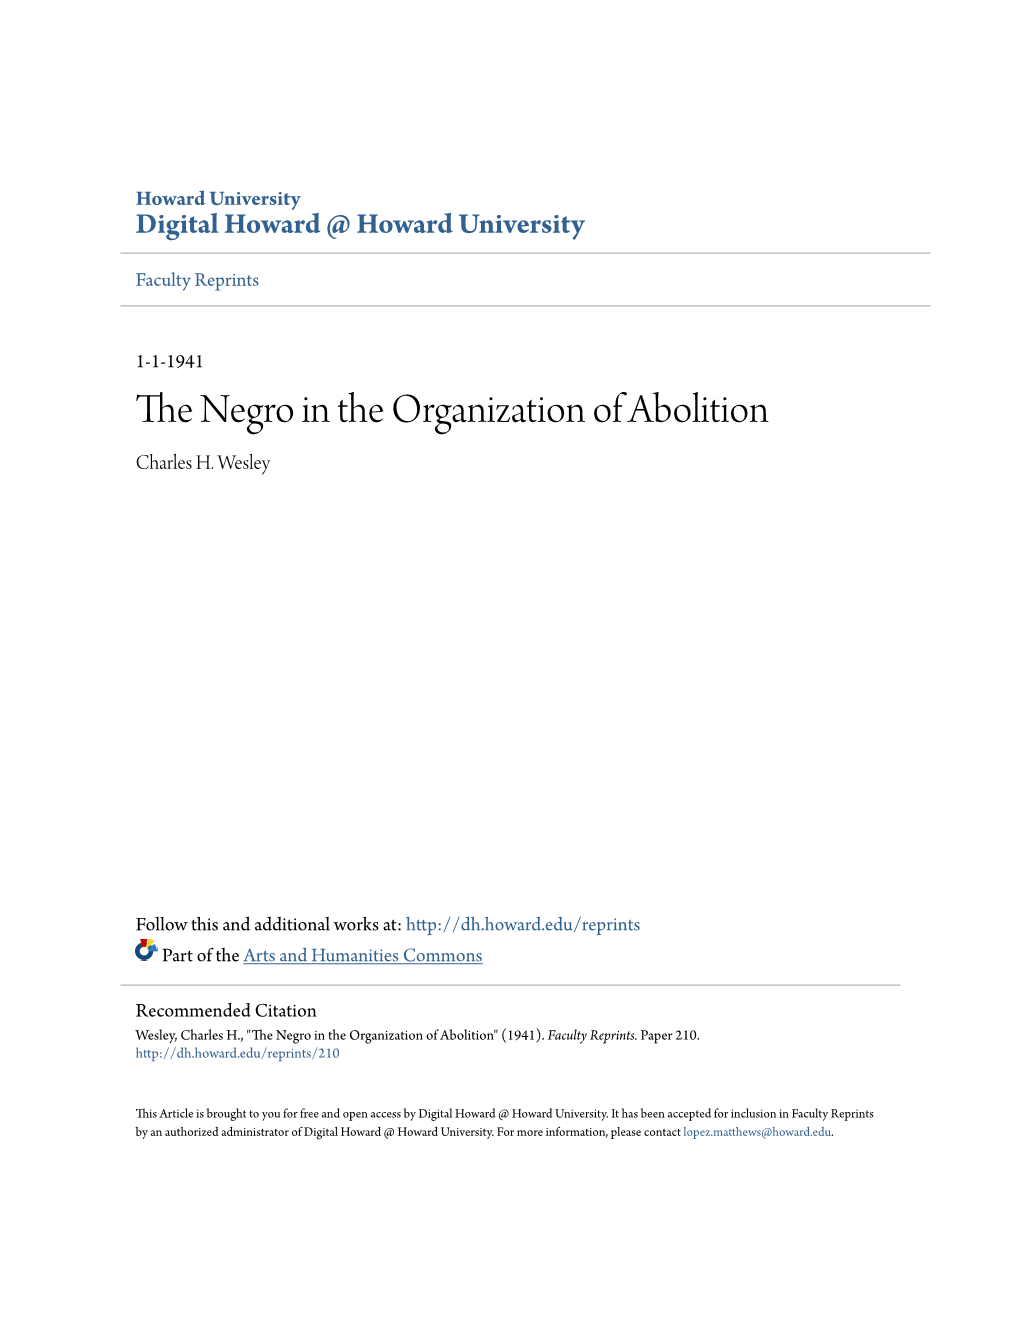 The Negro in the Organization of Abolition